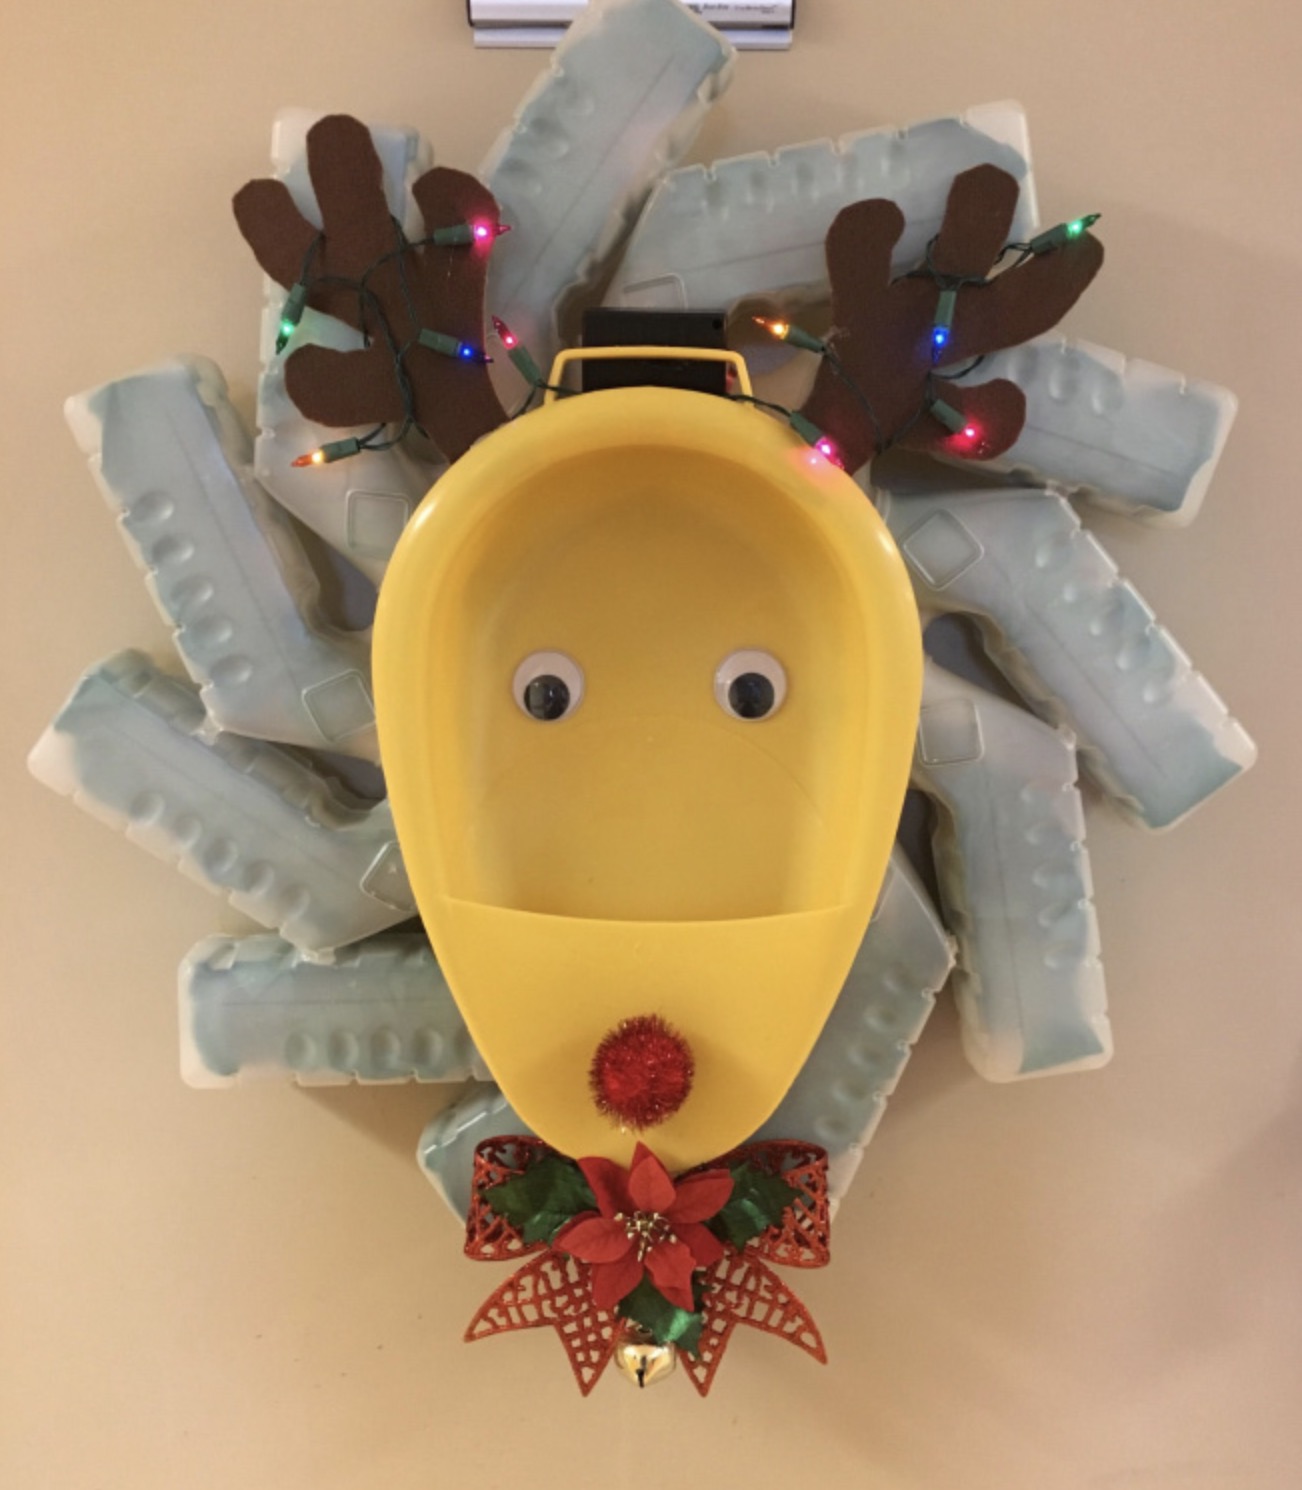 15 Improvised Christmas Decorations Made By Hospital Staff